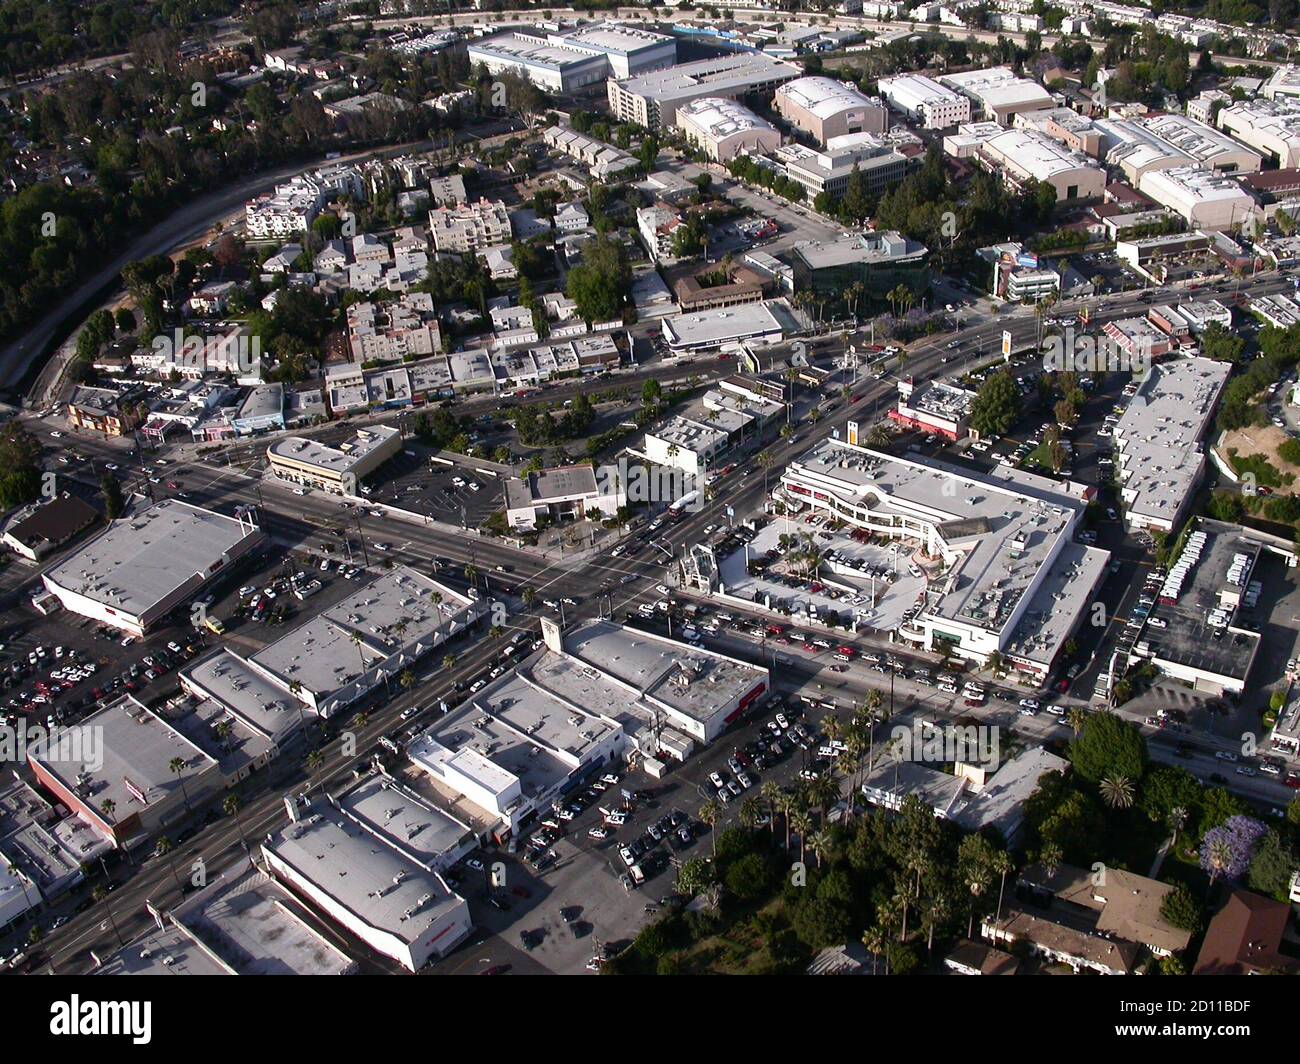 Los Angeles, California, USA - May 2004:  Archival aerial view of streets and buildings at the corner of Laurel Canyon Blvd and Ventura Blvd in the Studio City neighborhood of the San Fernando Valley. Stock Photo